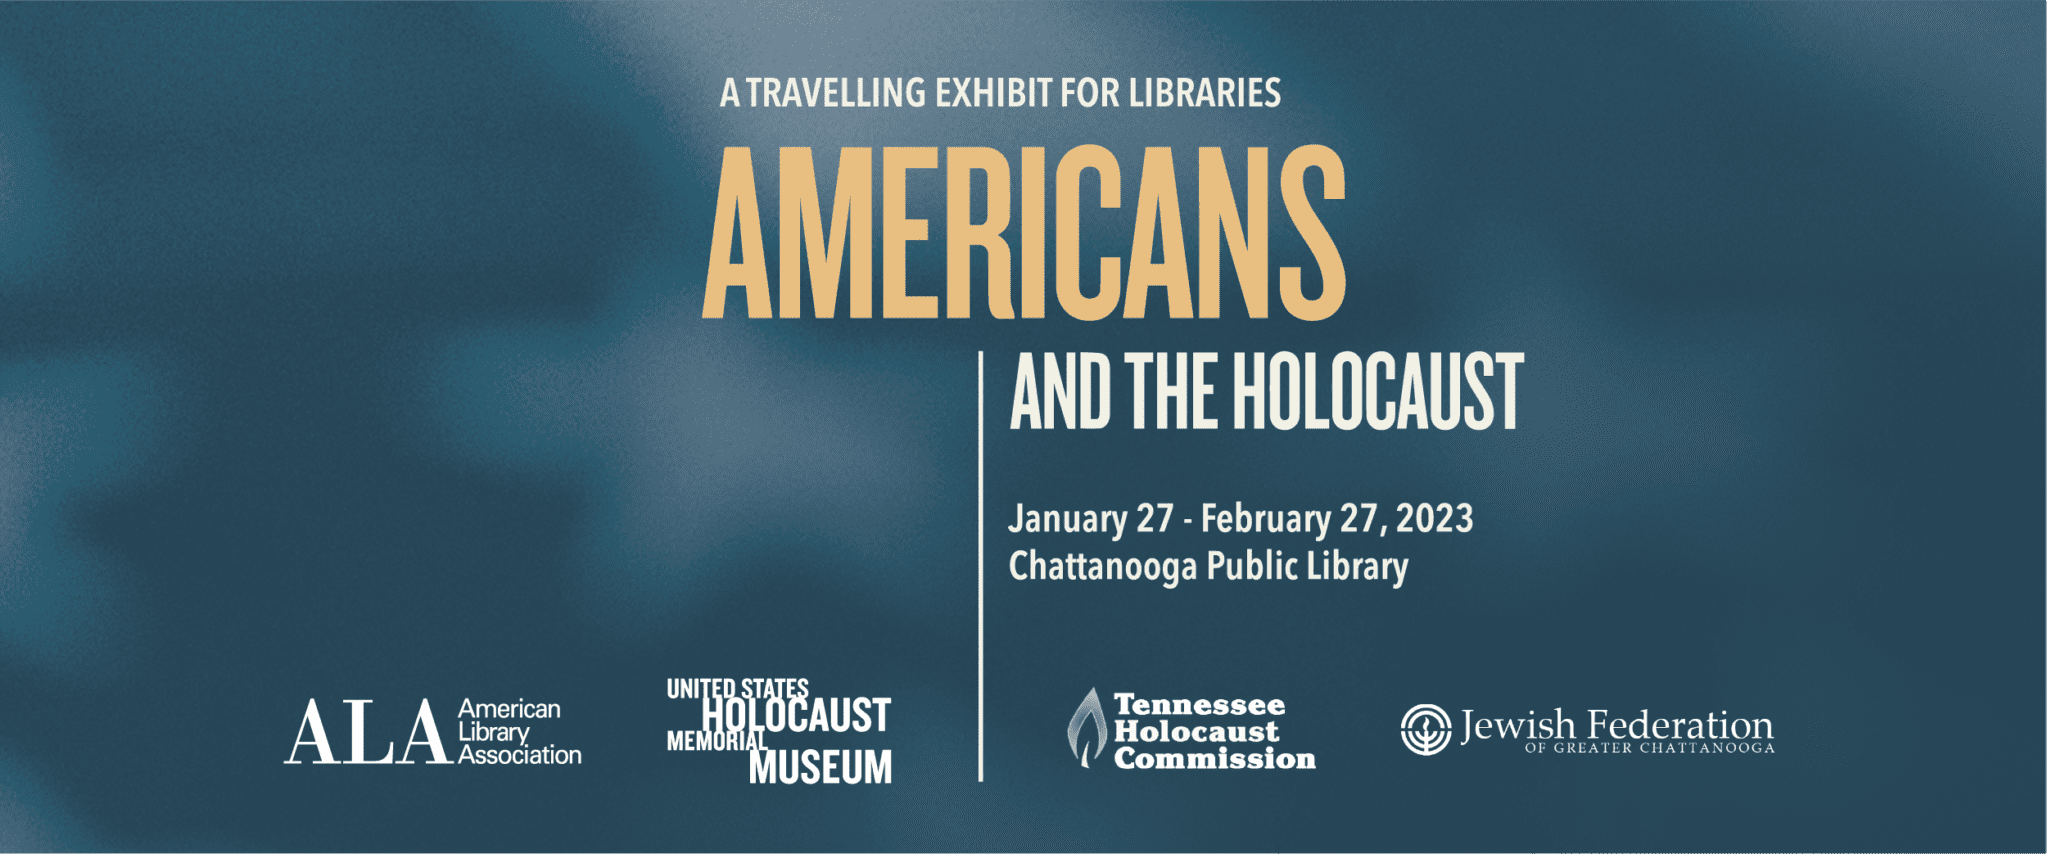 Americans and the Holocaust: A travelling exhibit for libraries graphic